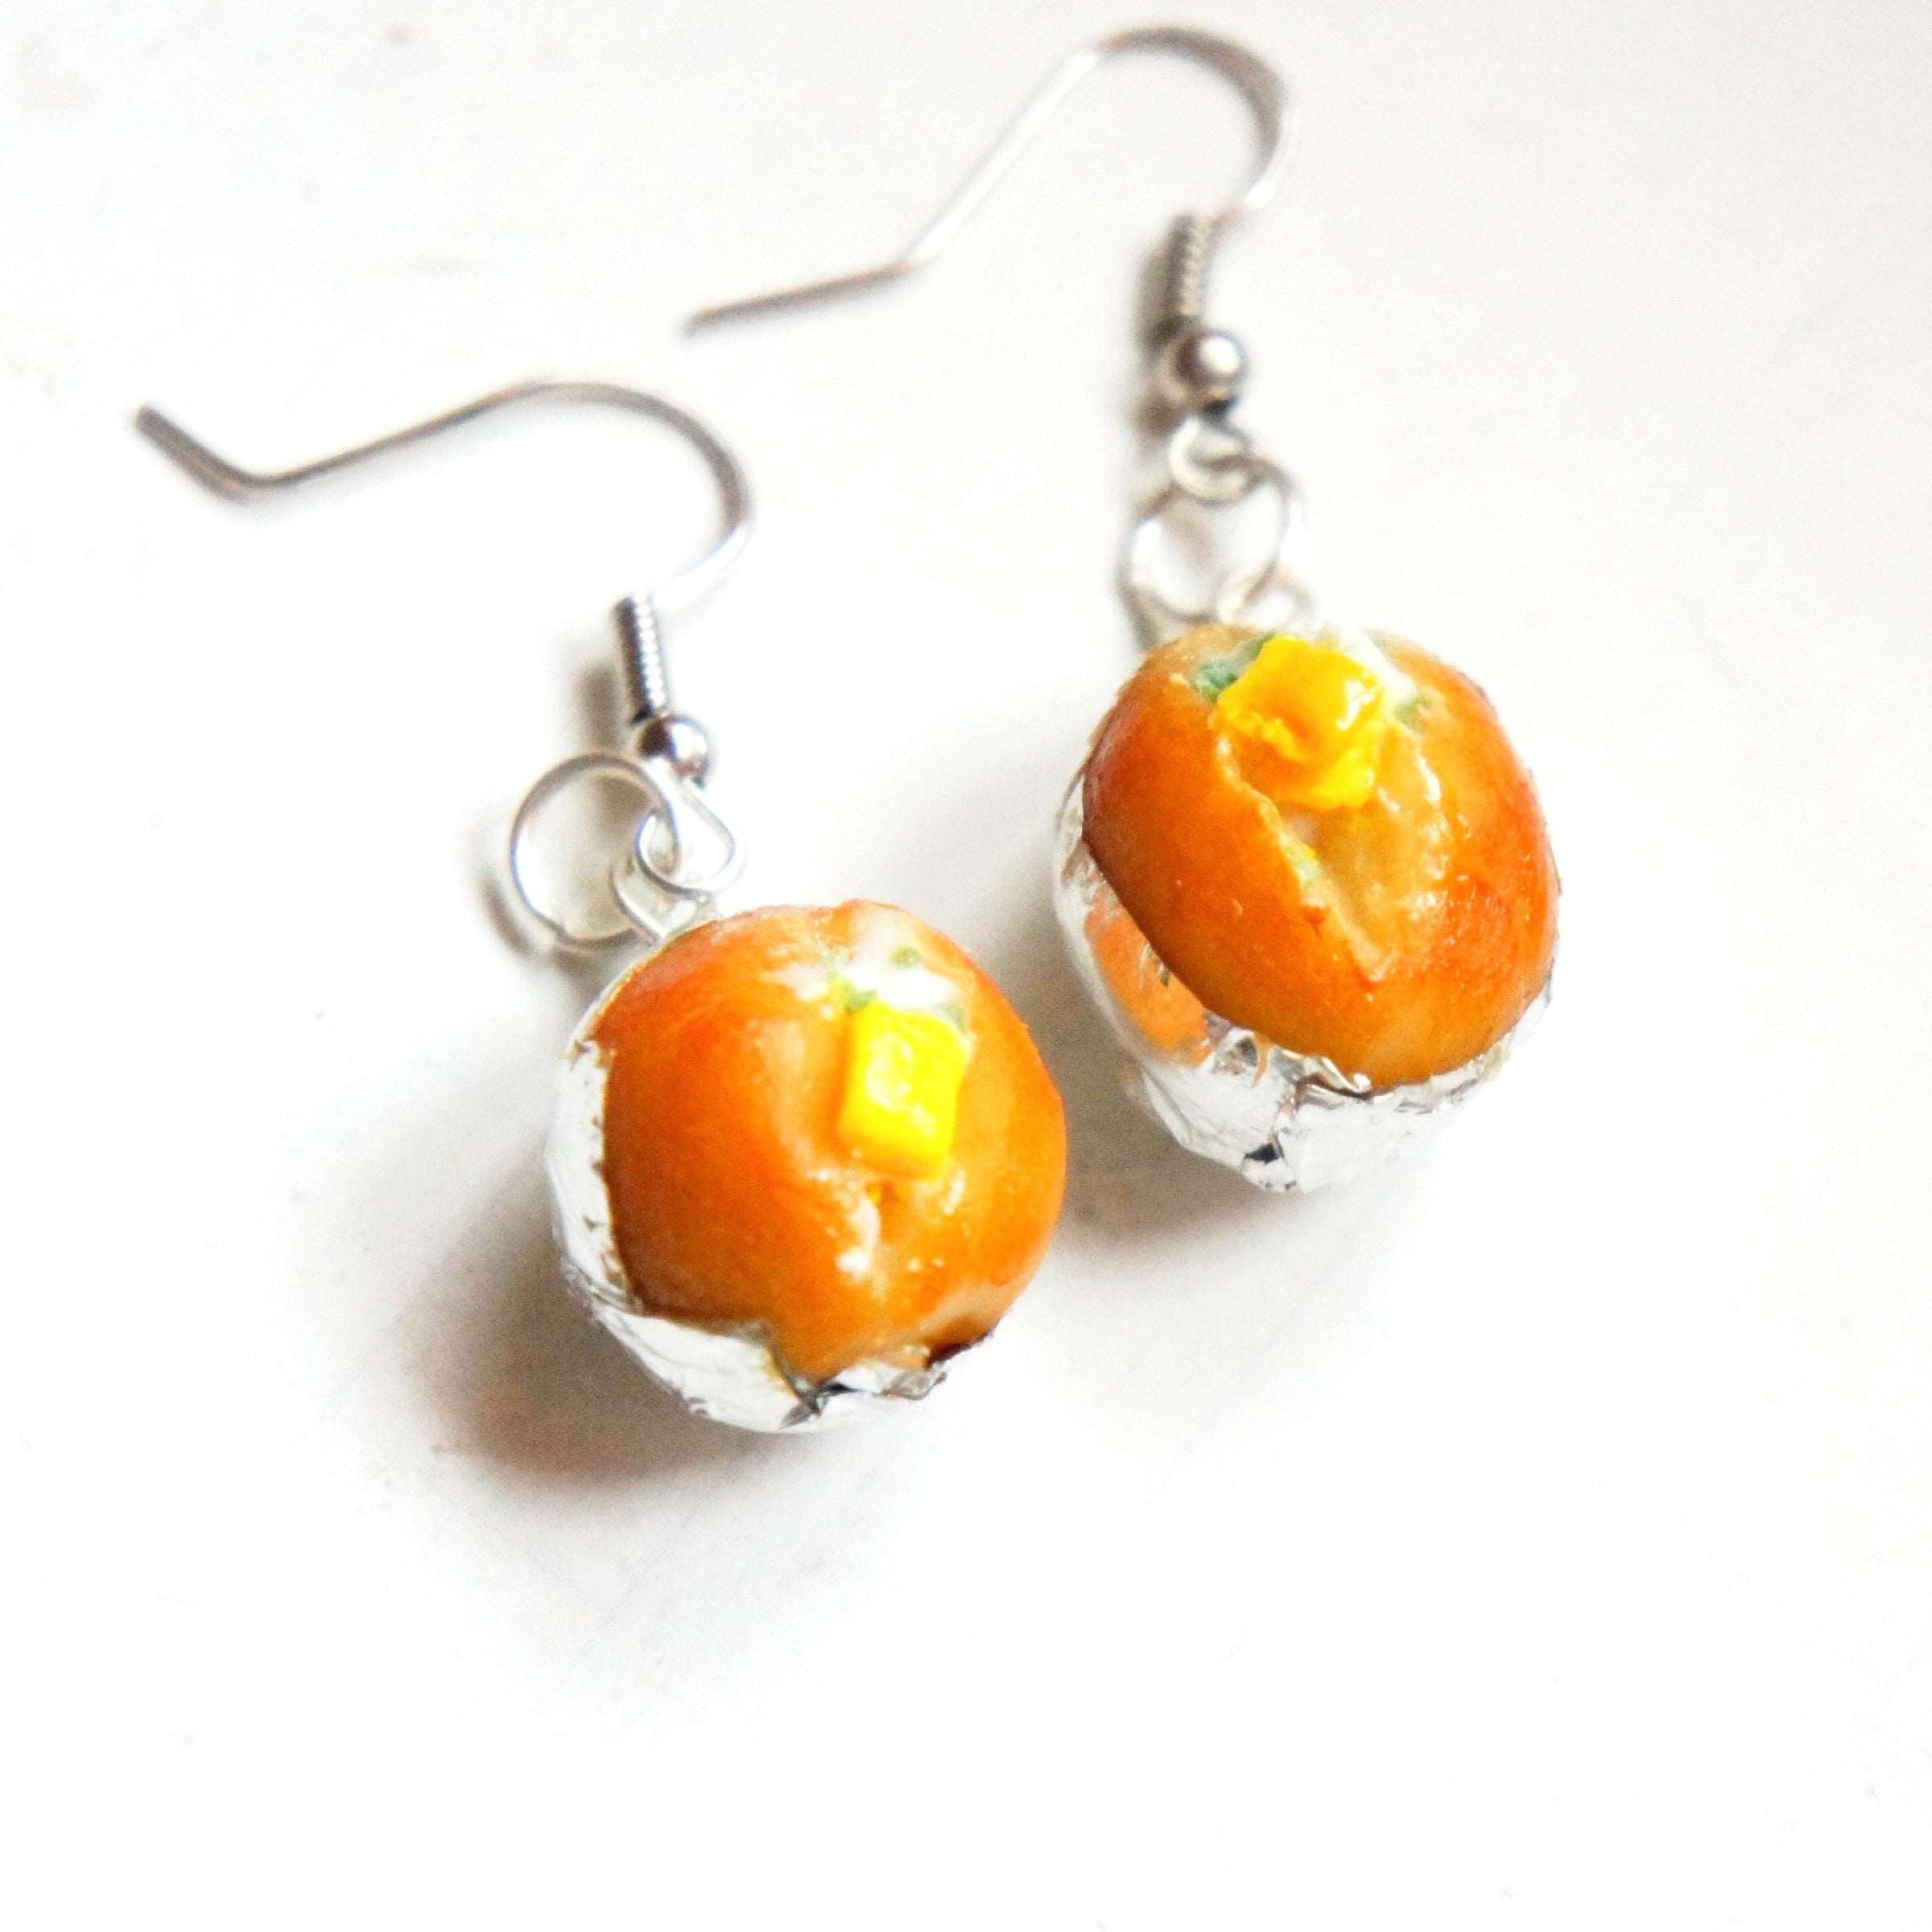 Baked Potato Dangle Earrings - Jillicious charms and accessories